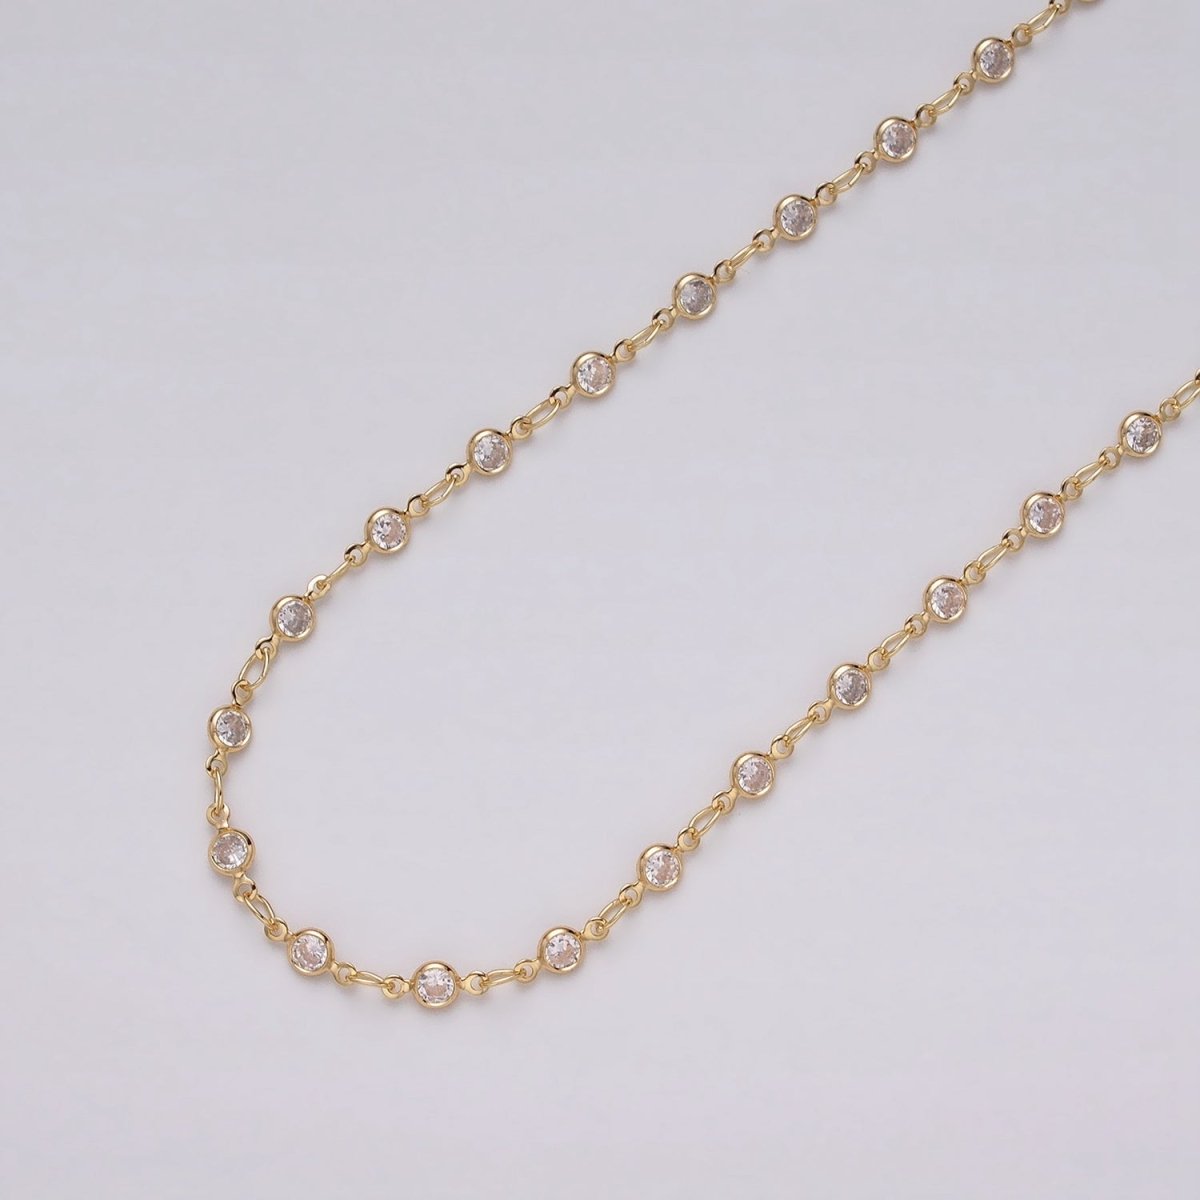 16K Gold Filled Round Diamond Bezel Cut Chain by Yard, Station CZ Chain by Yard for Necklace Bracelet Jewelry Making | ROLL-1337 ROLL-1338 - DLUXCA